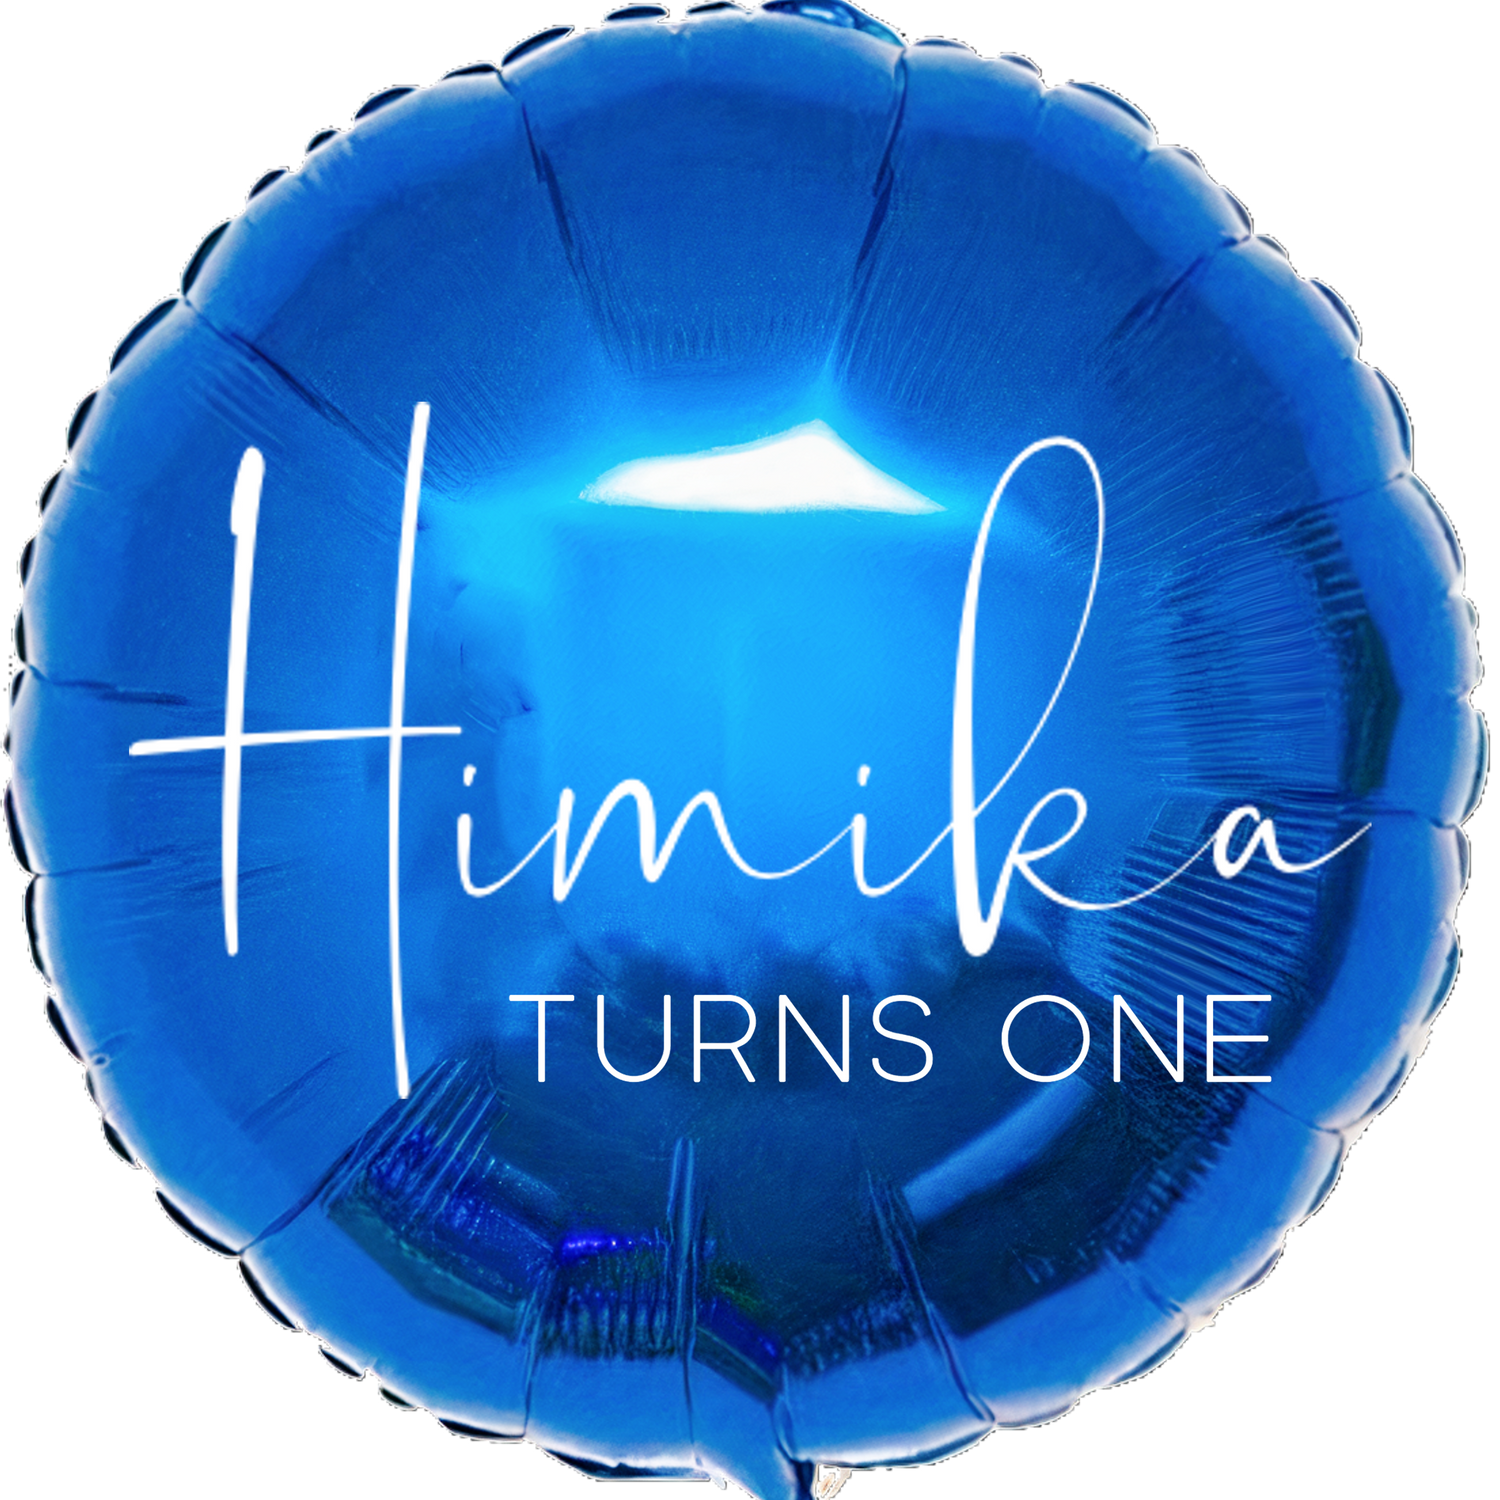 Custom Name/Text/Message Blue Round Personalized Balloons For First/Second/Third/Fourth/Fifth/Sixth, Seventh/Eighth/Ninth/Tenth/Teen Birthday, Milestone Birthday or a Special Themed Birthday Party or an Indoor/Outdoor Event. Supports Helium/Air, Luxury Bespoke Balloons Are a Perfect Surprise For Your Baby Boy And Girl.